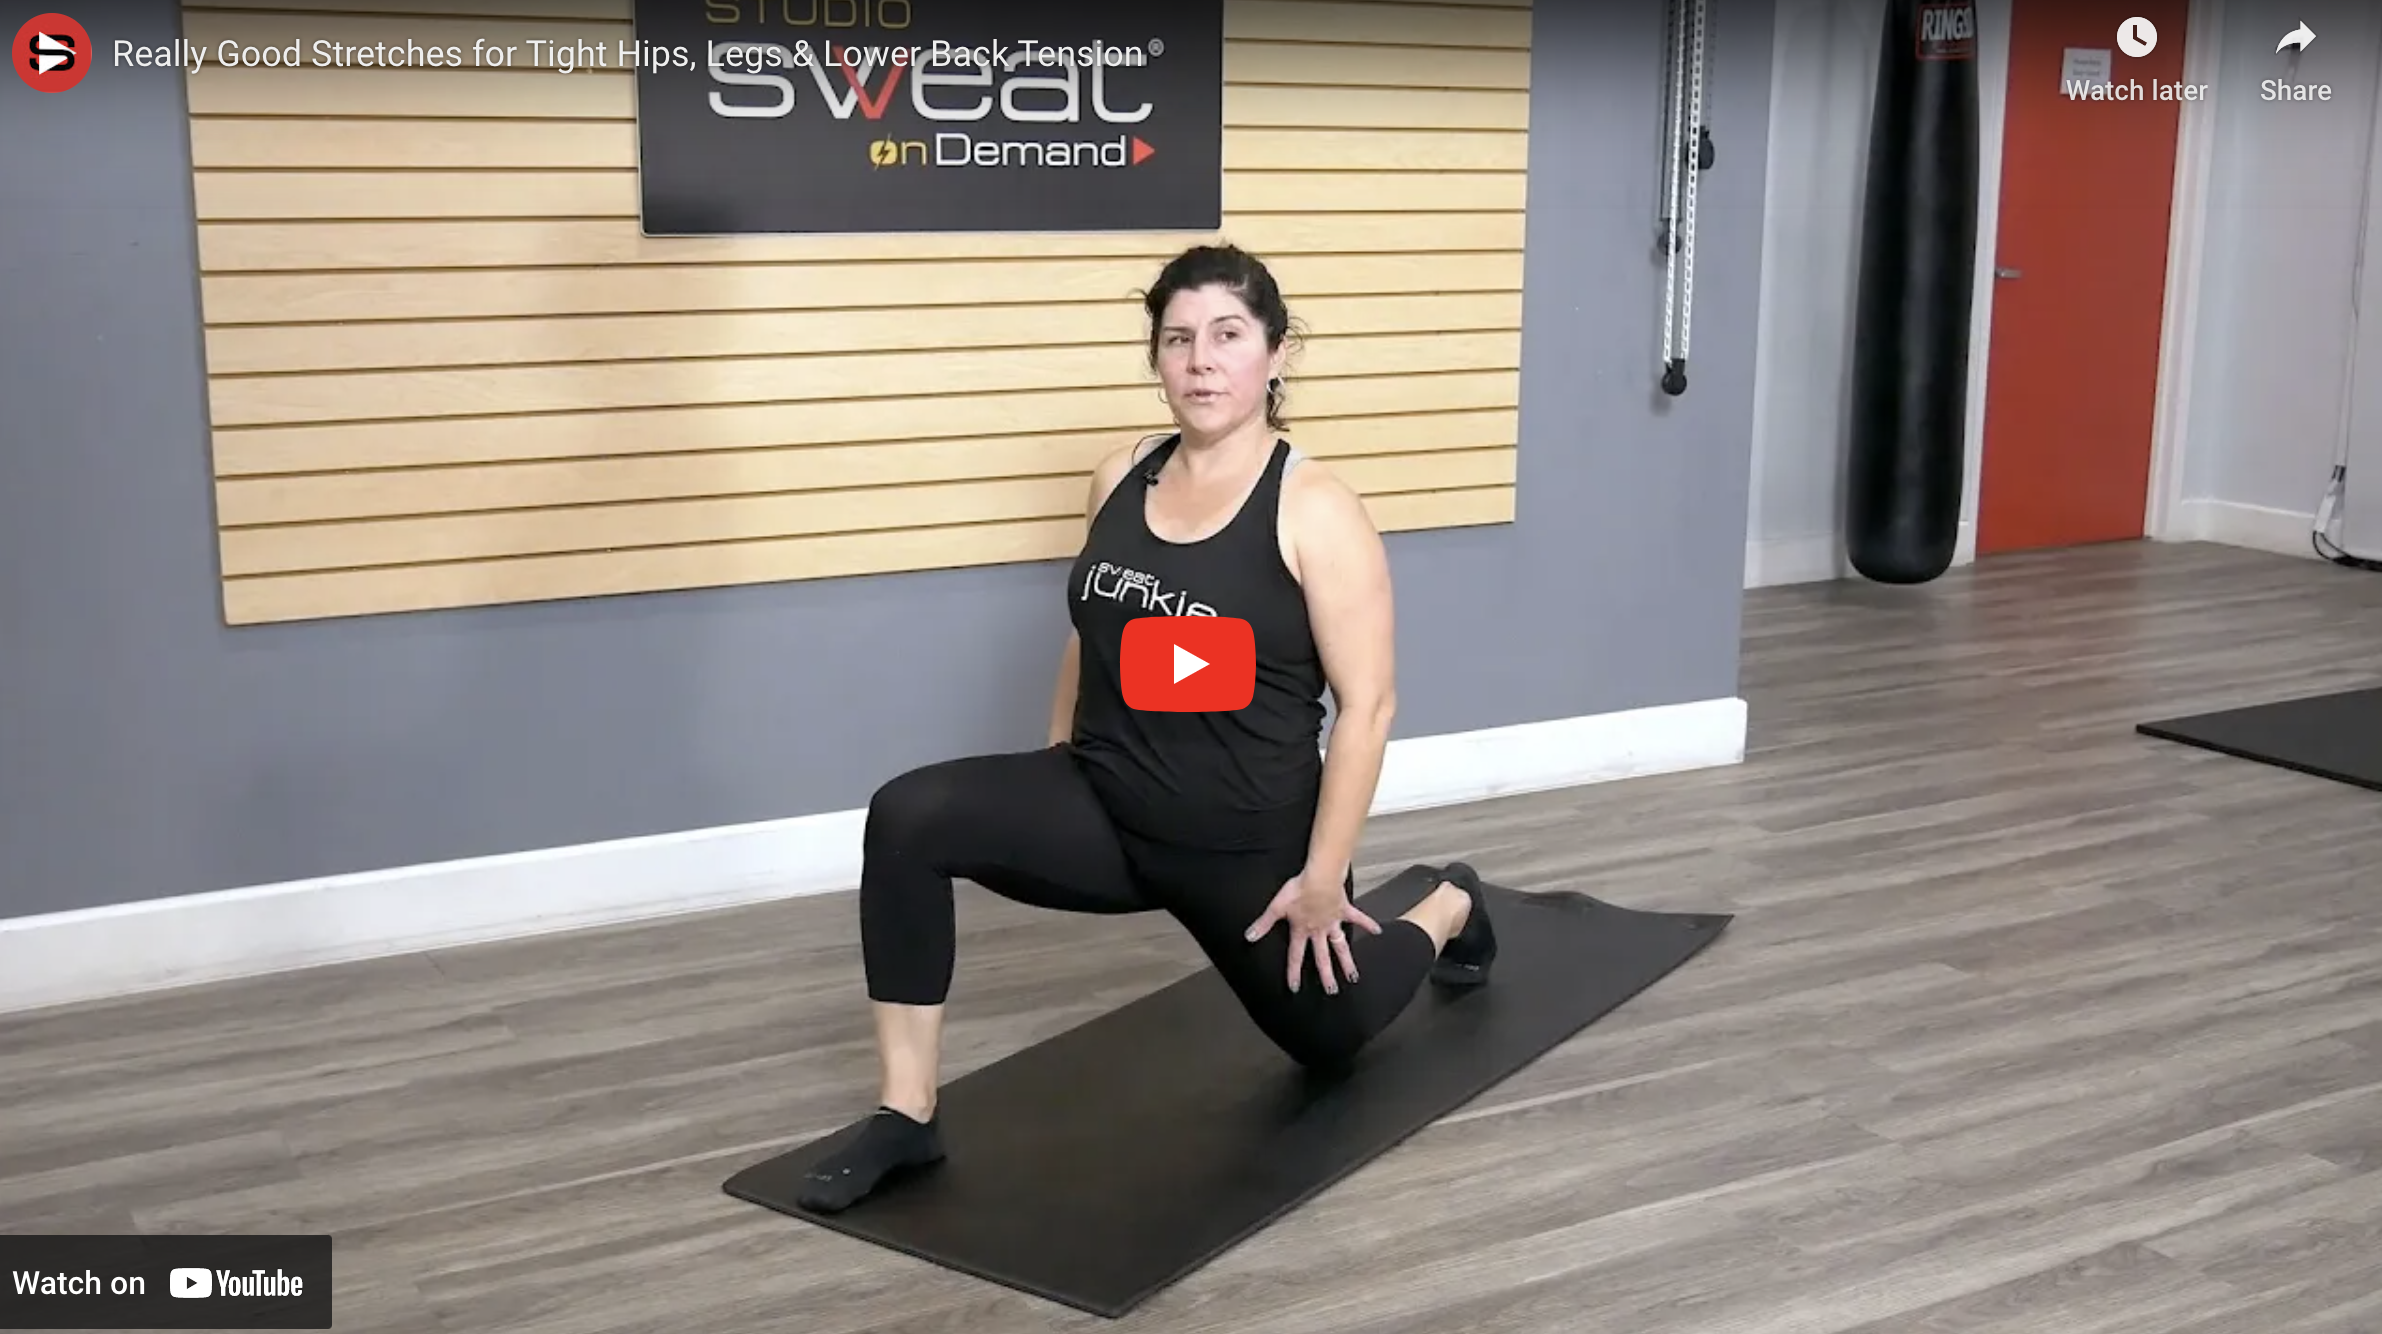 https://s27561.pcdn.co/wp-content/uploads/2023/02/Really-Good-Stretches-for-Tight-Hips-Legs-Lower-Back-Tension-vlog.png